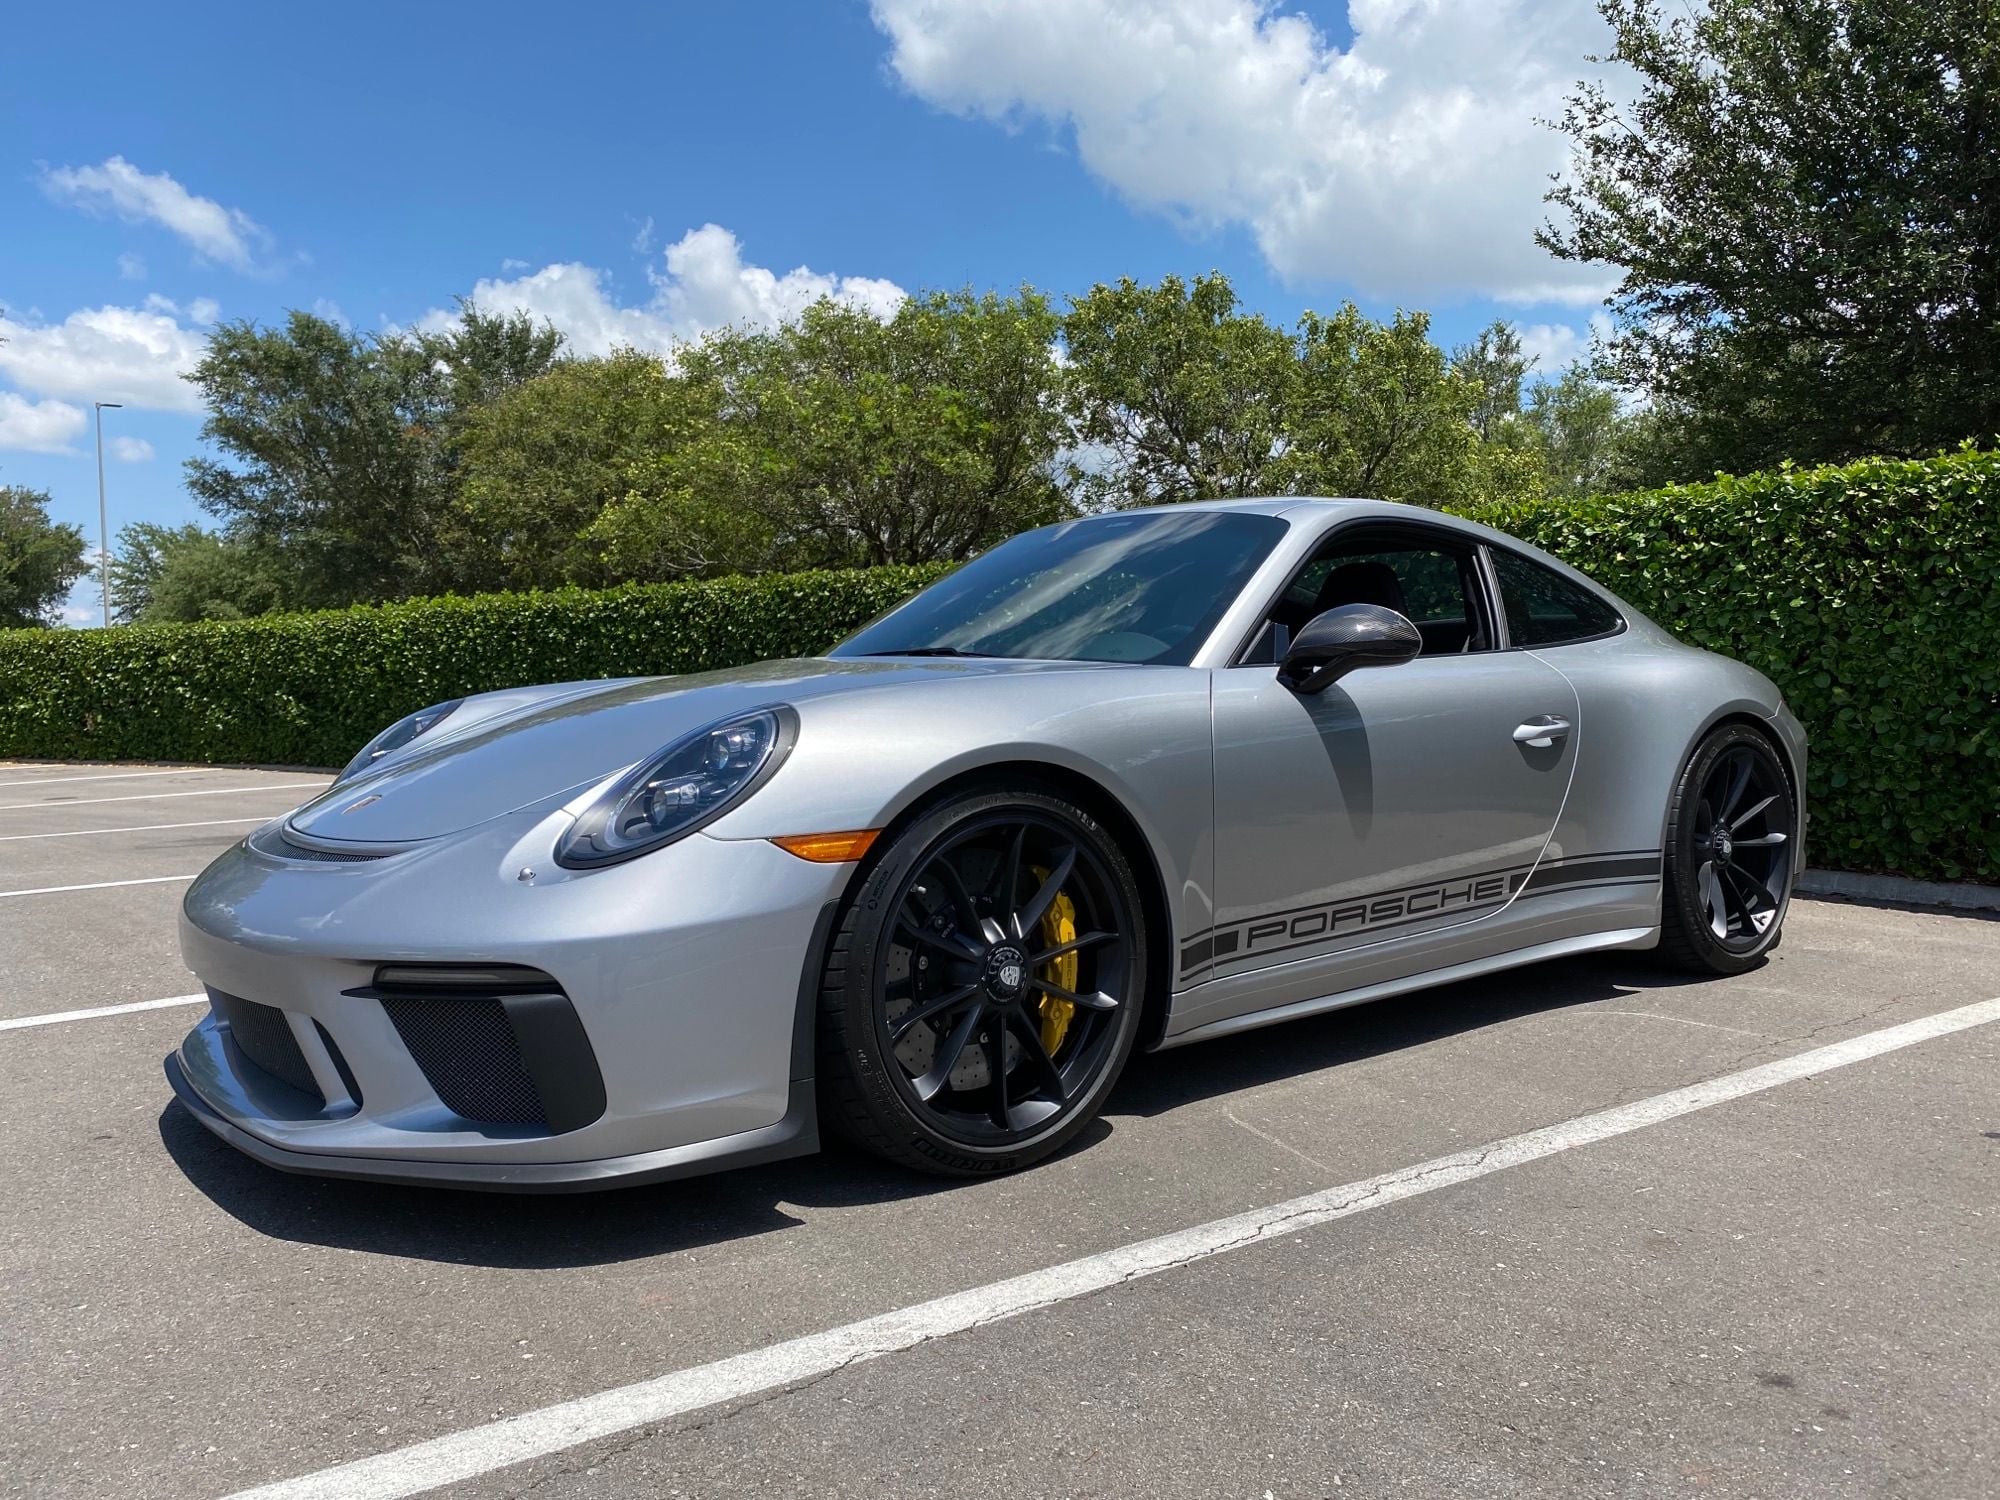 2018 Porsche 911 - 2018 Porsche 911 GT3 Touring - GT Silver - 14K miles - Used - VIN WP0AC2A90JS175259 - 14,250 Miles - 6 cyl - 2WD - Manual - Coupe - Silver - Oklahoma City, OK 73118, United States